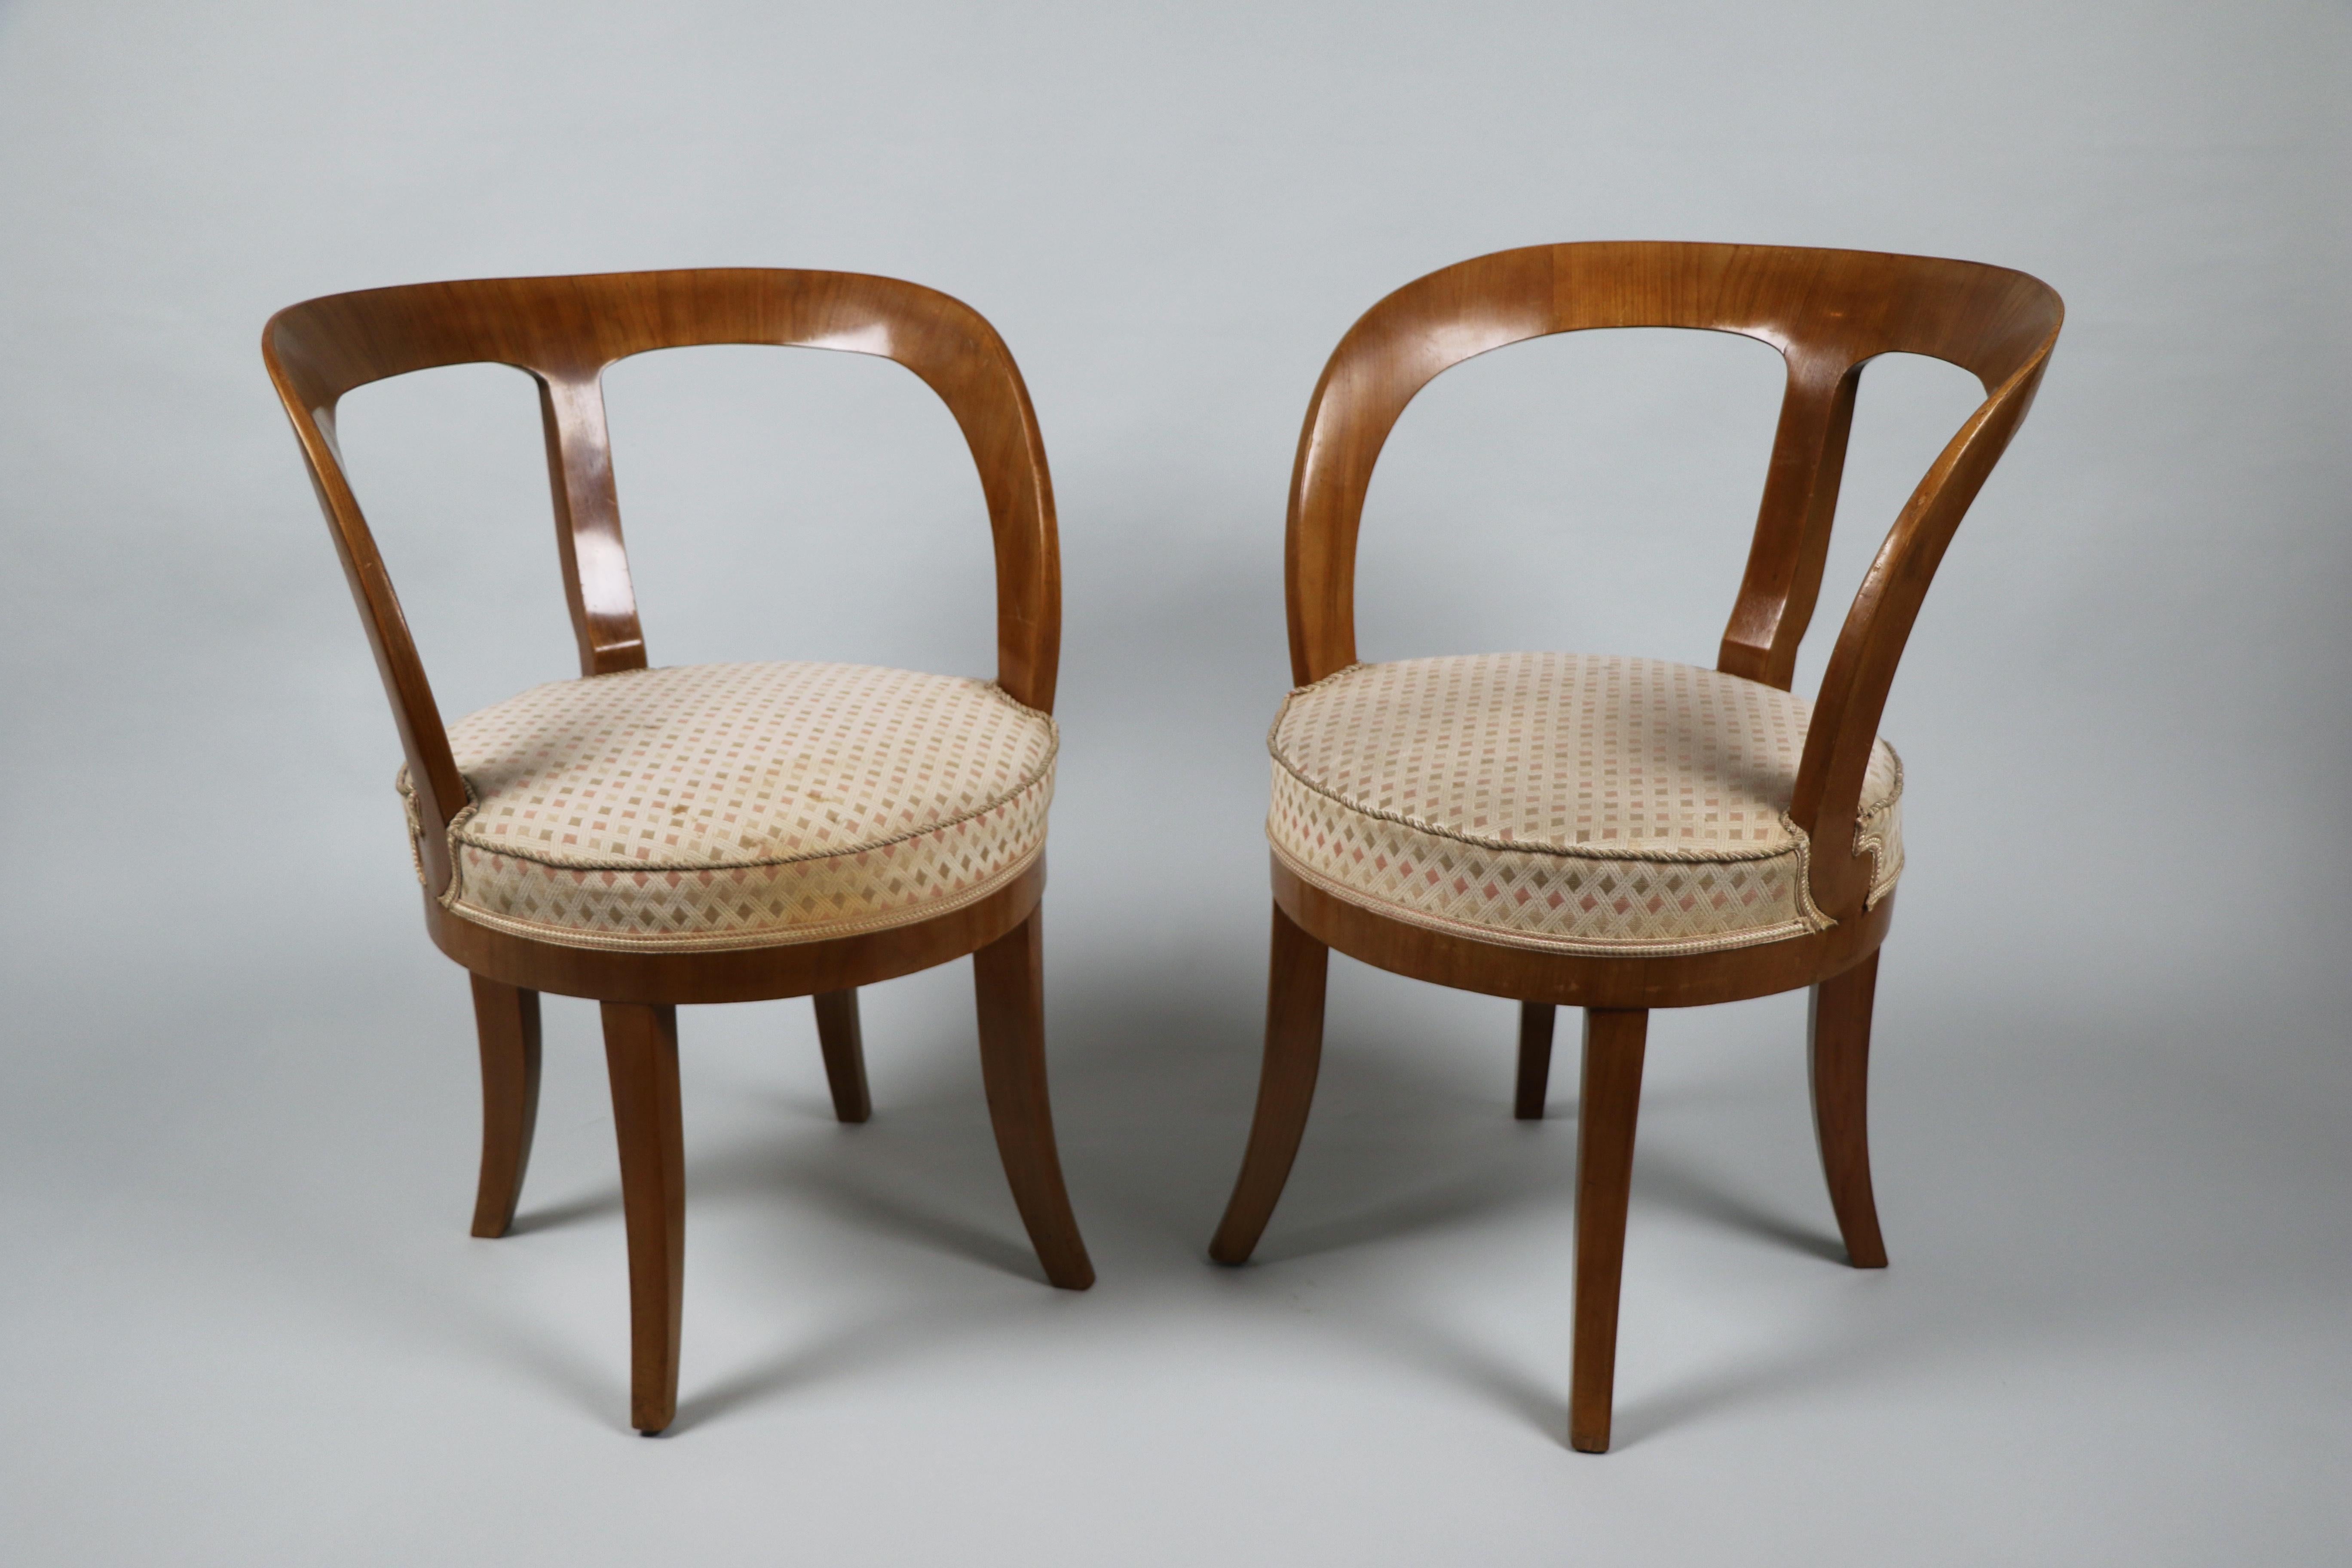 These fine and rare Biedermeier chairs were made in Vienna circa 1825.

Viennese Biedermeier pieces are distinguished by their sophisticated proportions, rare and refined design, excellent craftsmanship and continue to have a great influence on